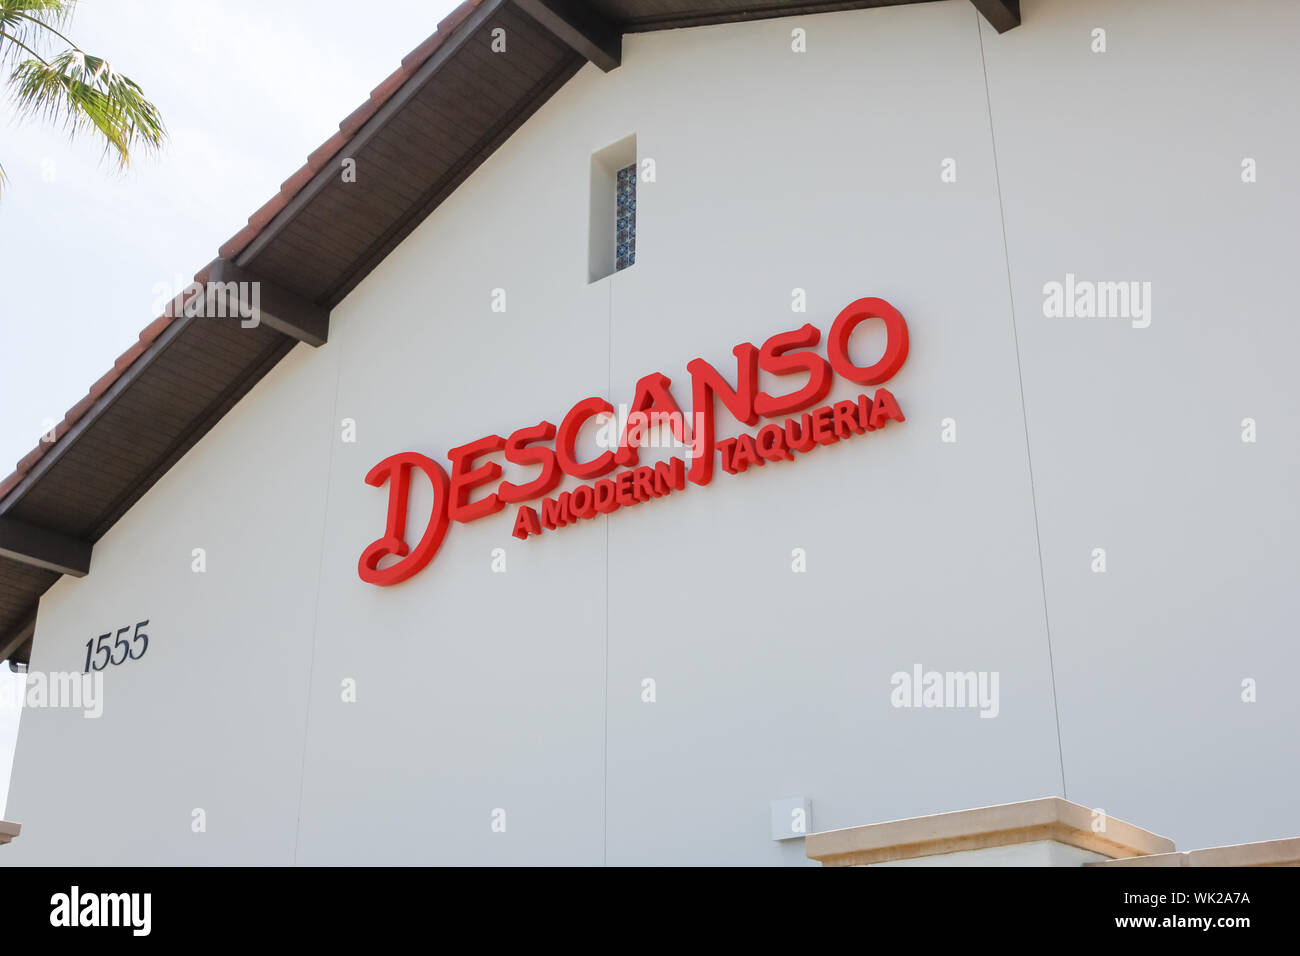 A store front sign for the Mexican restaurant known as Descanso A Modern Taqueria Stock Photo